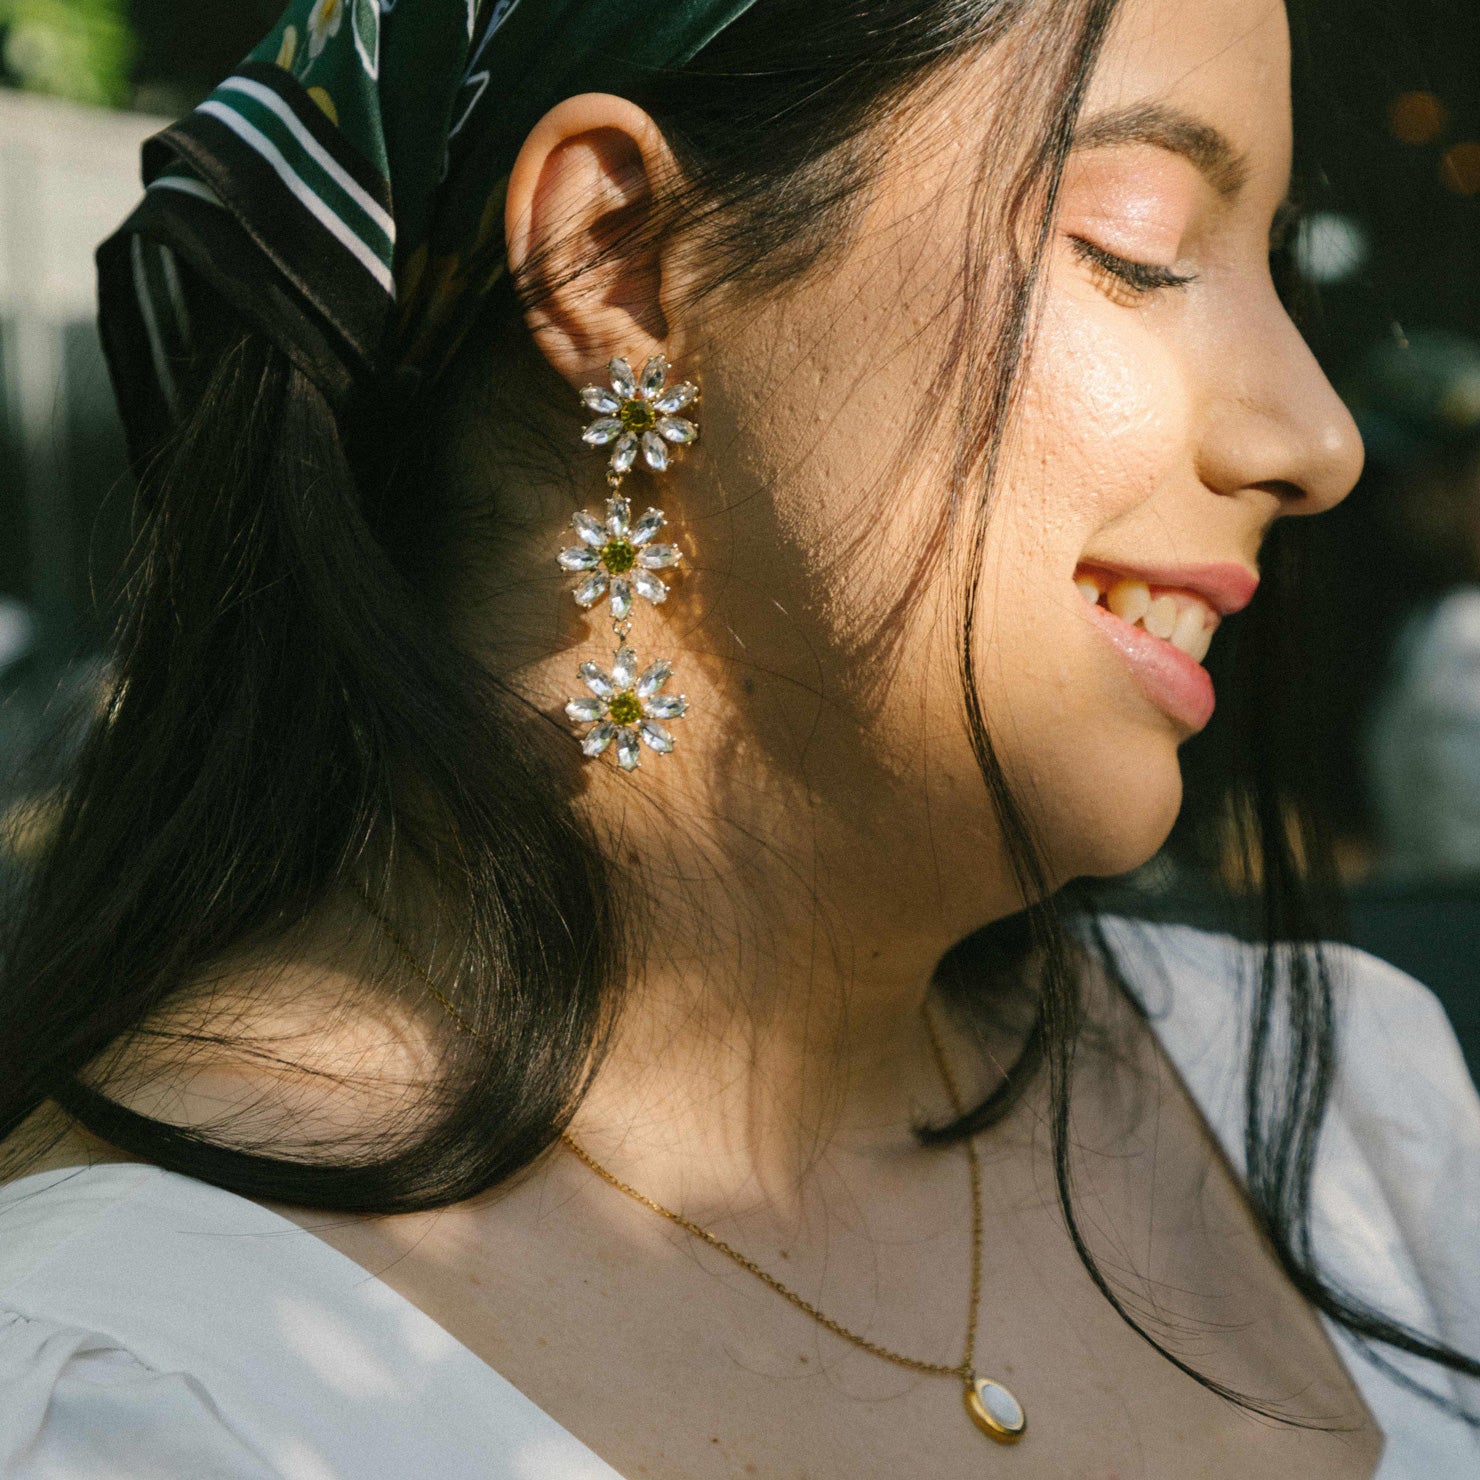 A model wearing the Crystal Flower Drop Clip On Earrings feature a Padded Clip-On closure, perfect for ears of larger proportions as the earrings are on the heavier side. Constructed of gold tone copper alloy and Rhinestone, with detachable rubber padding for added comfort, these earrings provide up to 8-12 hours of easy wear. Sold as one single pair.